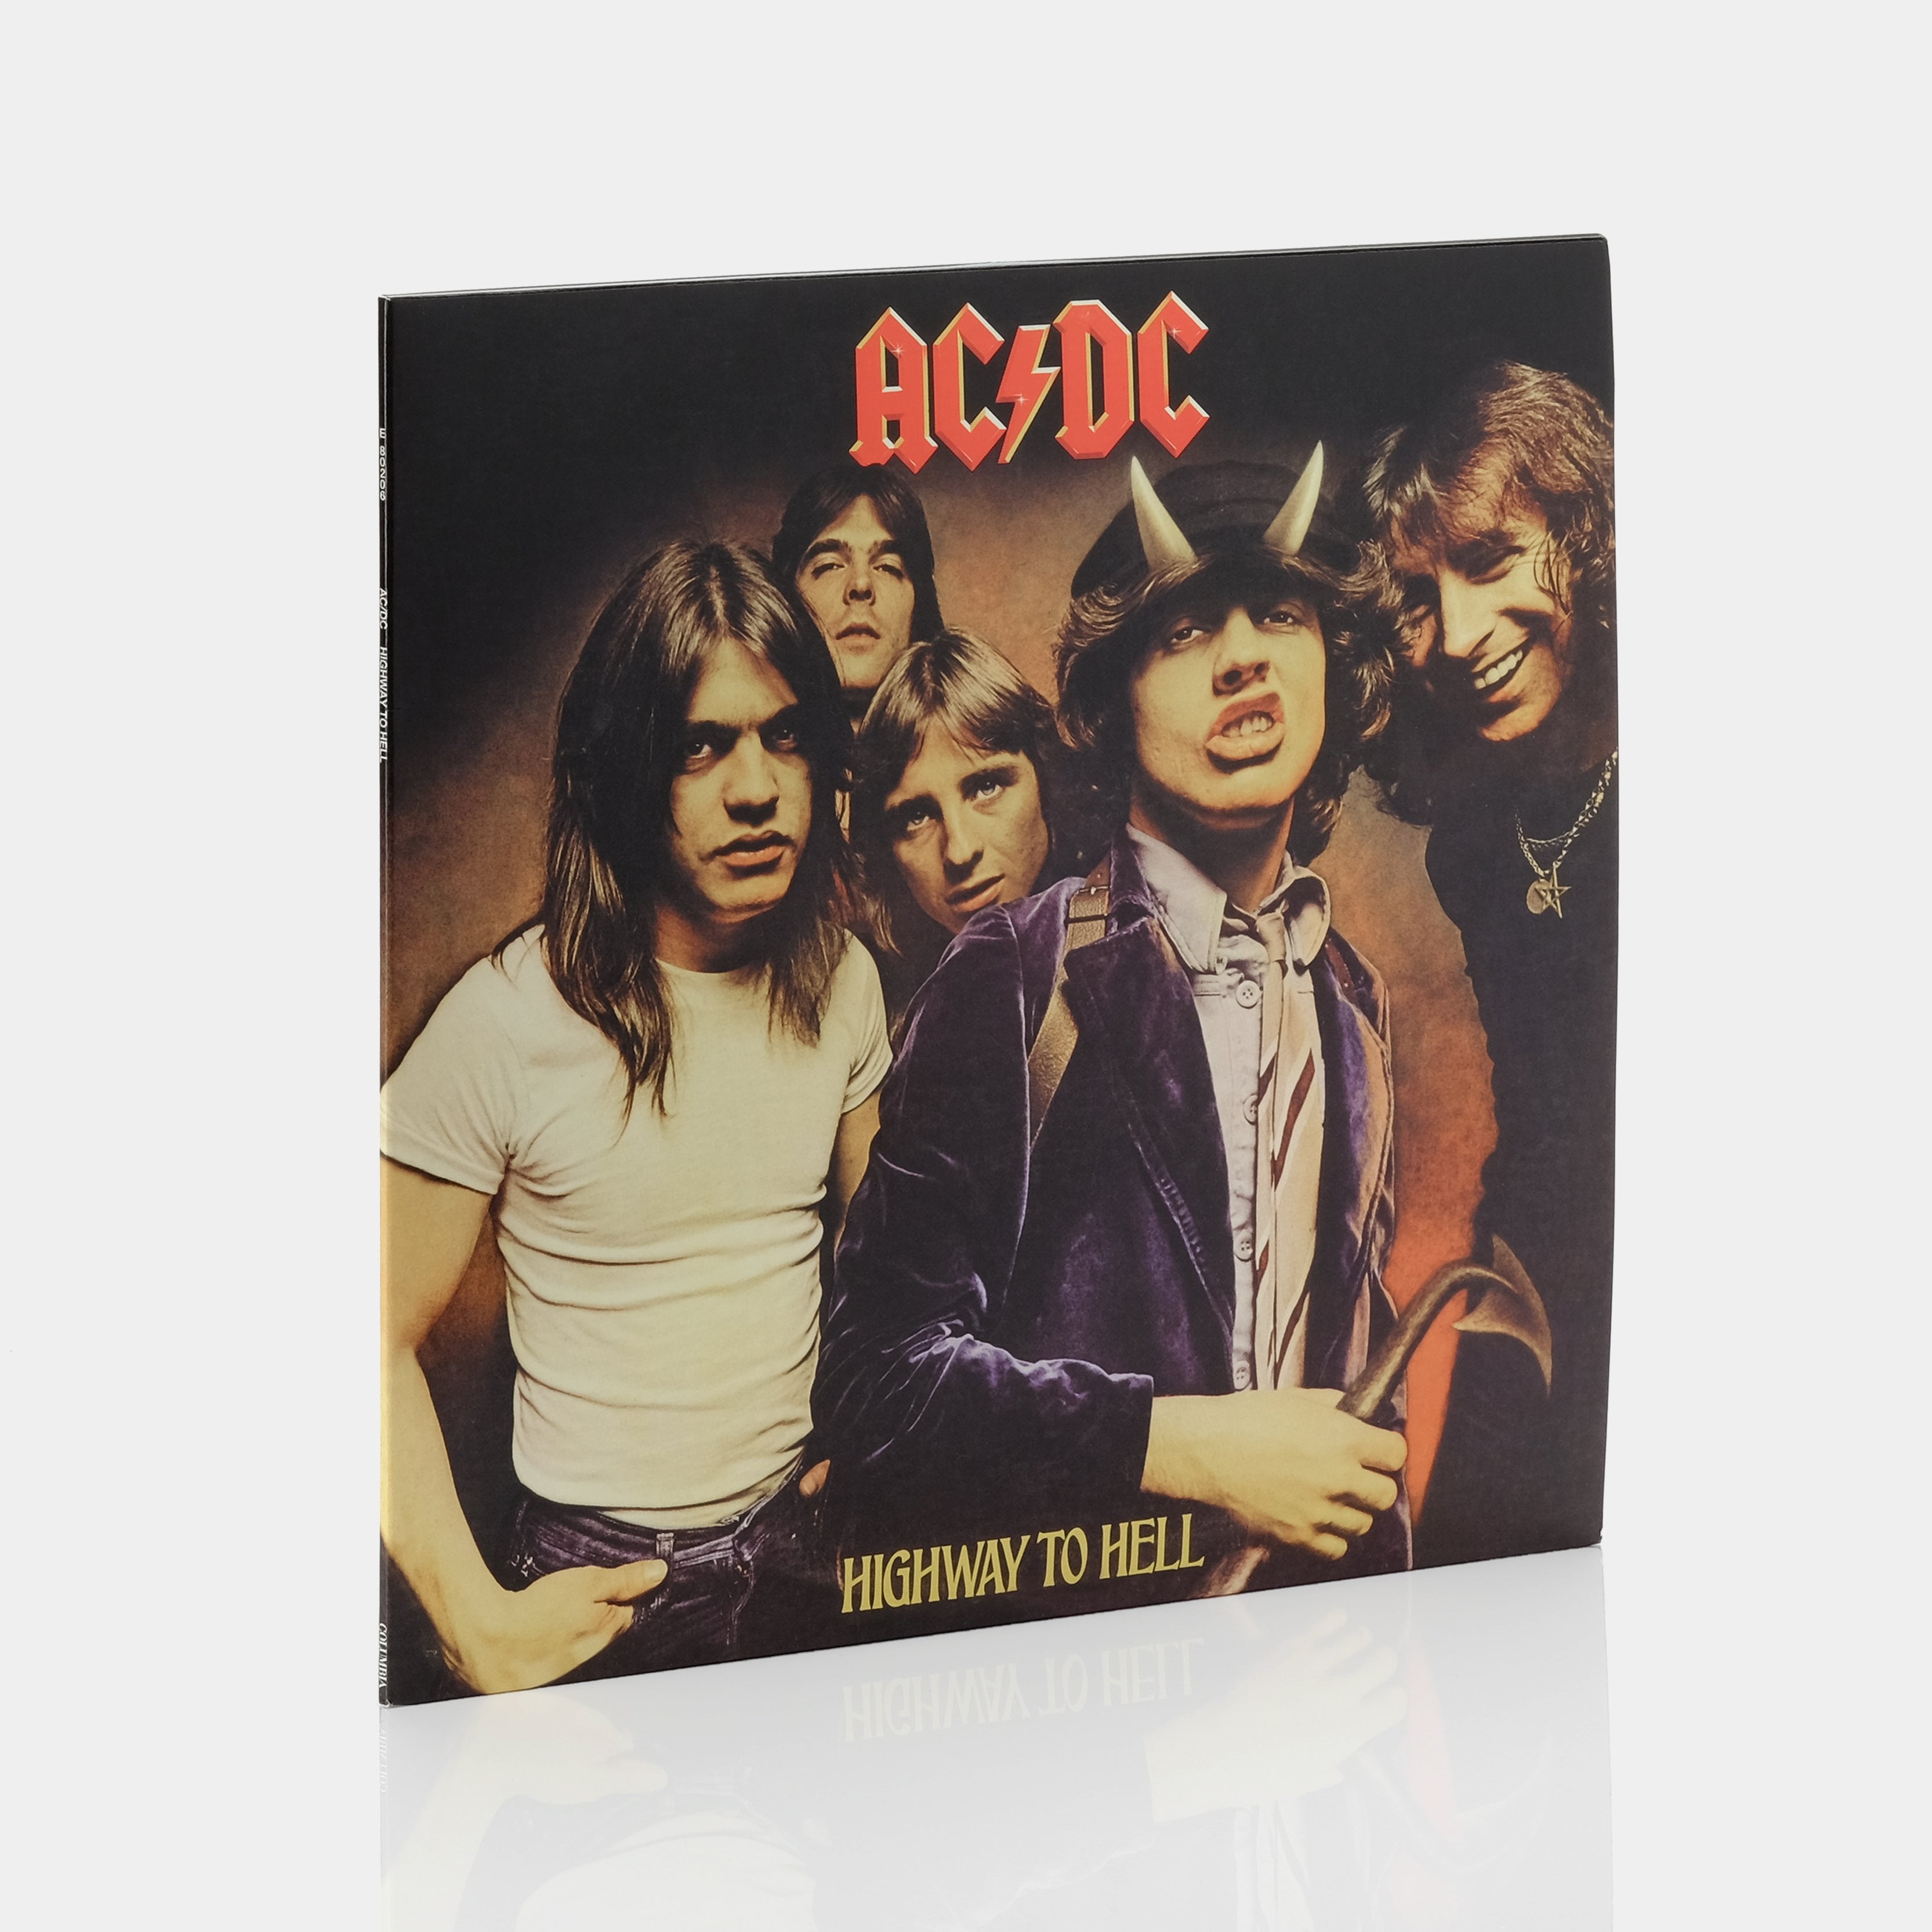 AC/DC - Highway To Hell LP Record